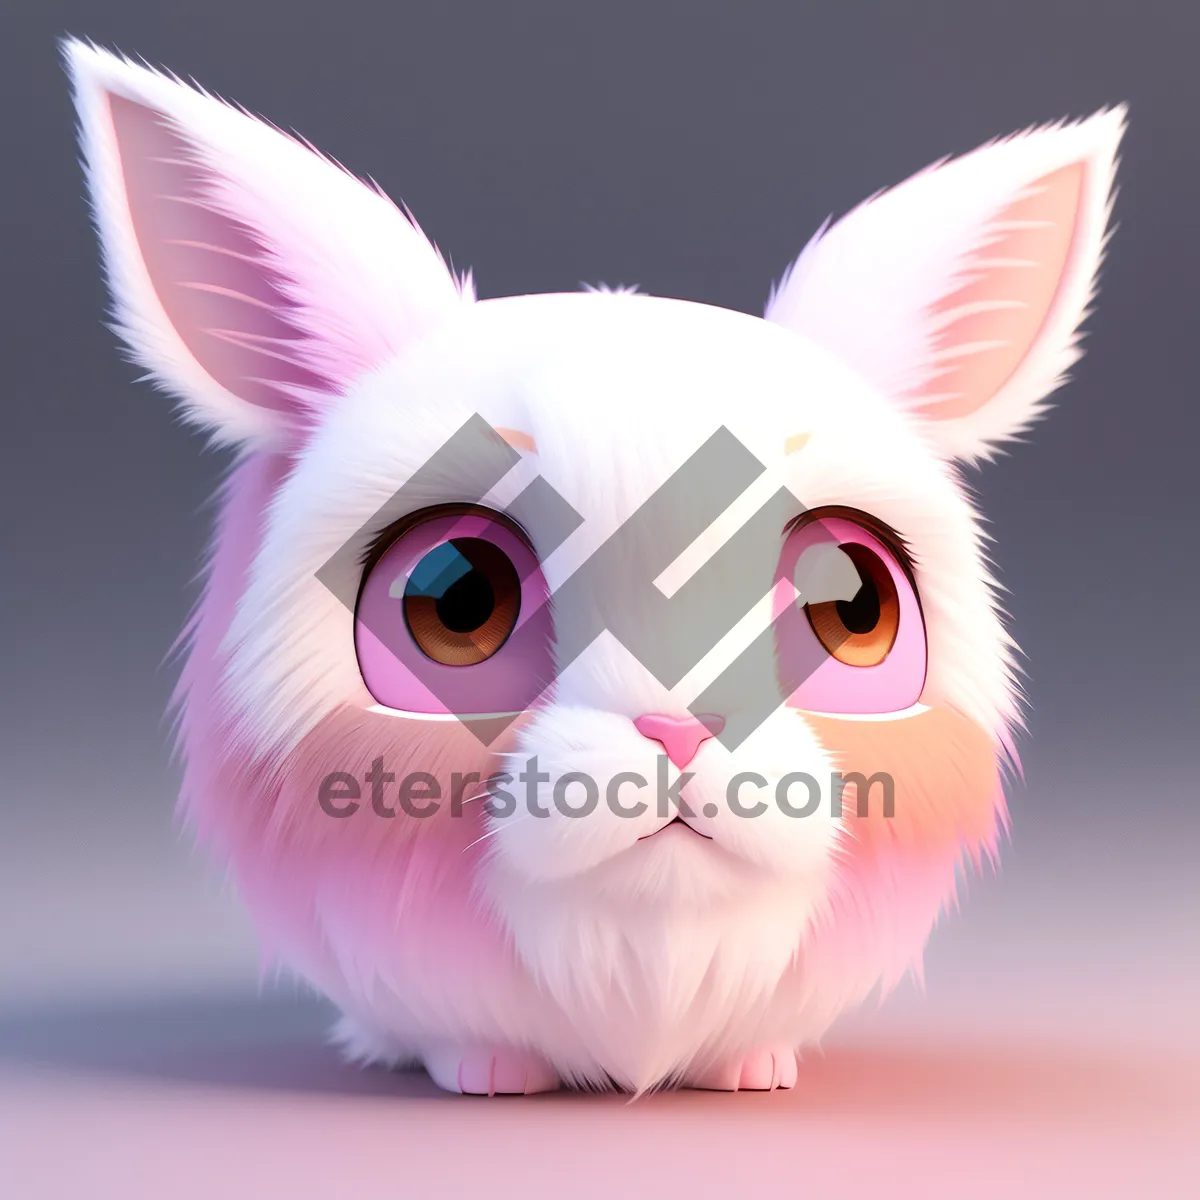 Picture of Fluffy Bunny with Cute Ears - Studio Portrait